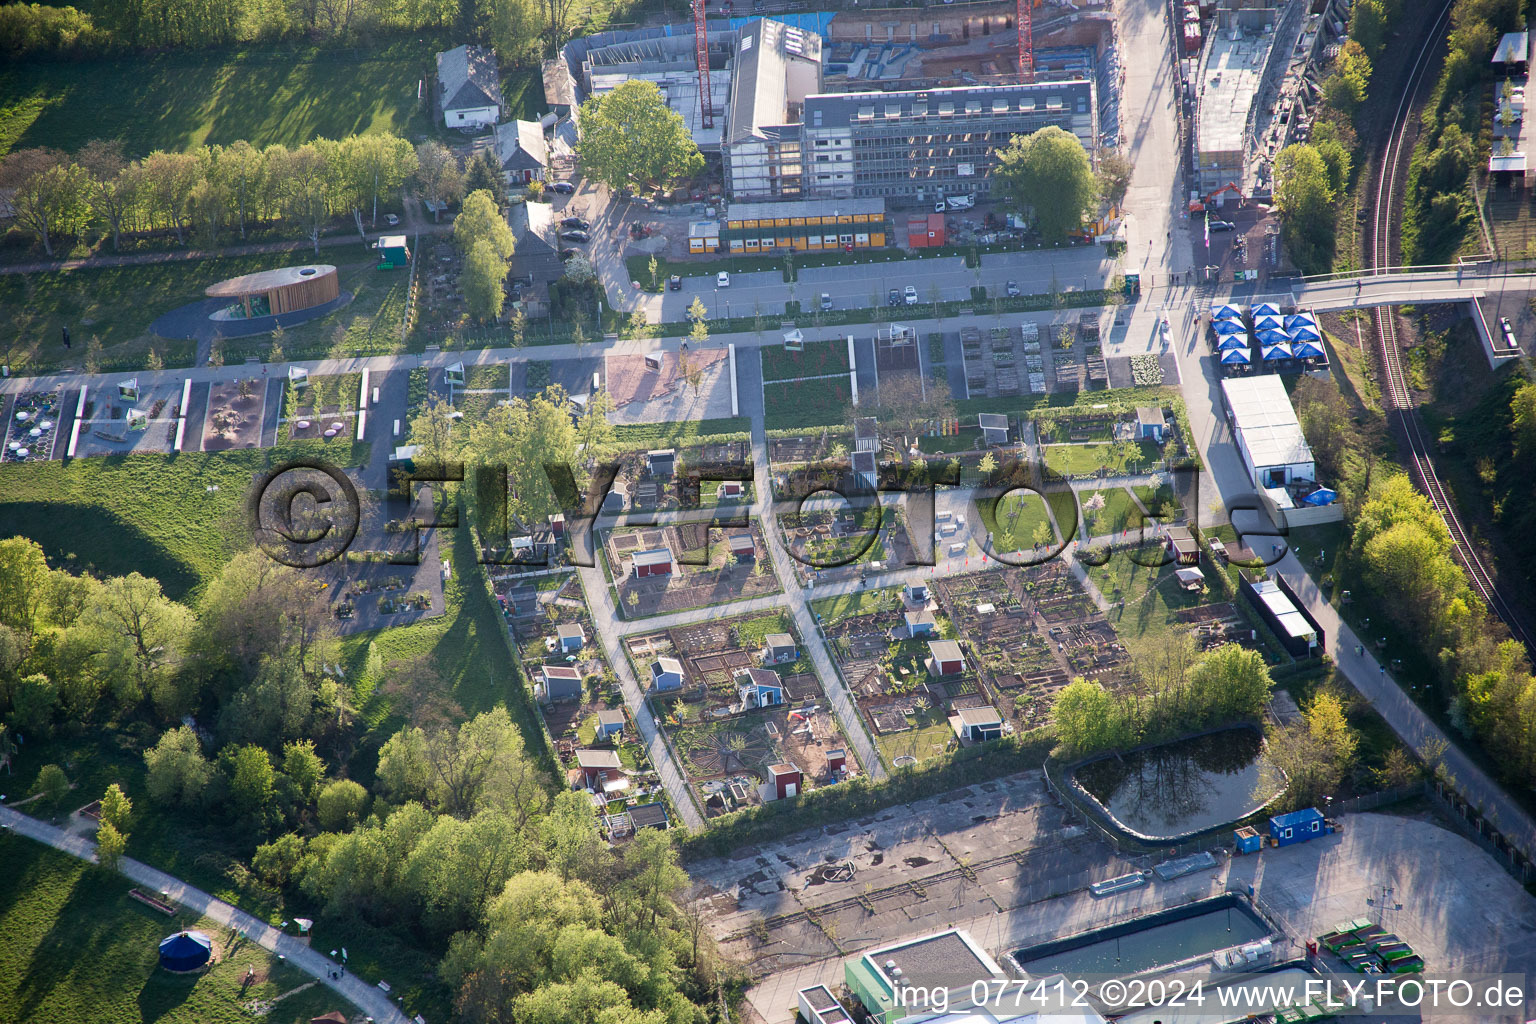 State Garden Show grounds in Landau in der Pfalz in the state Rhineland-Palatinate, Germany from above